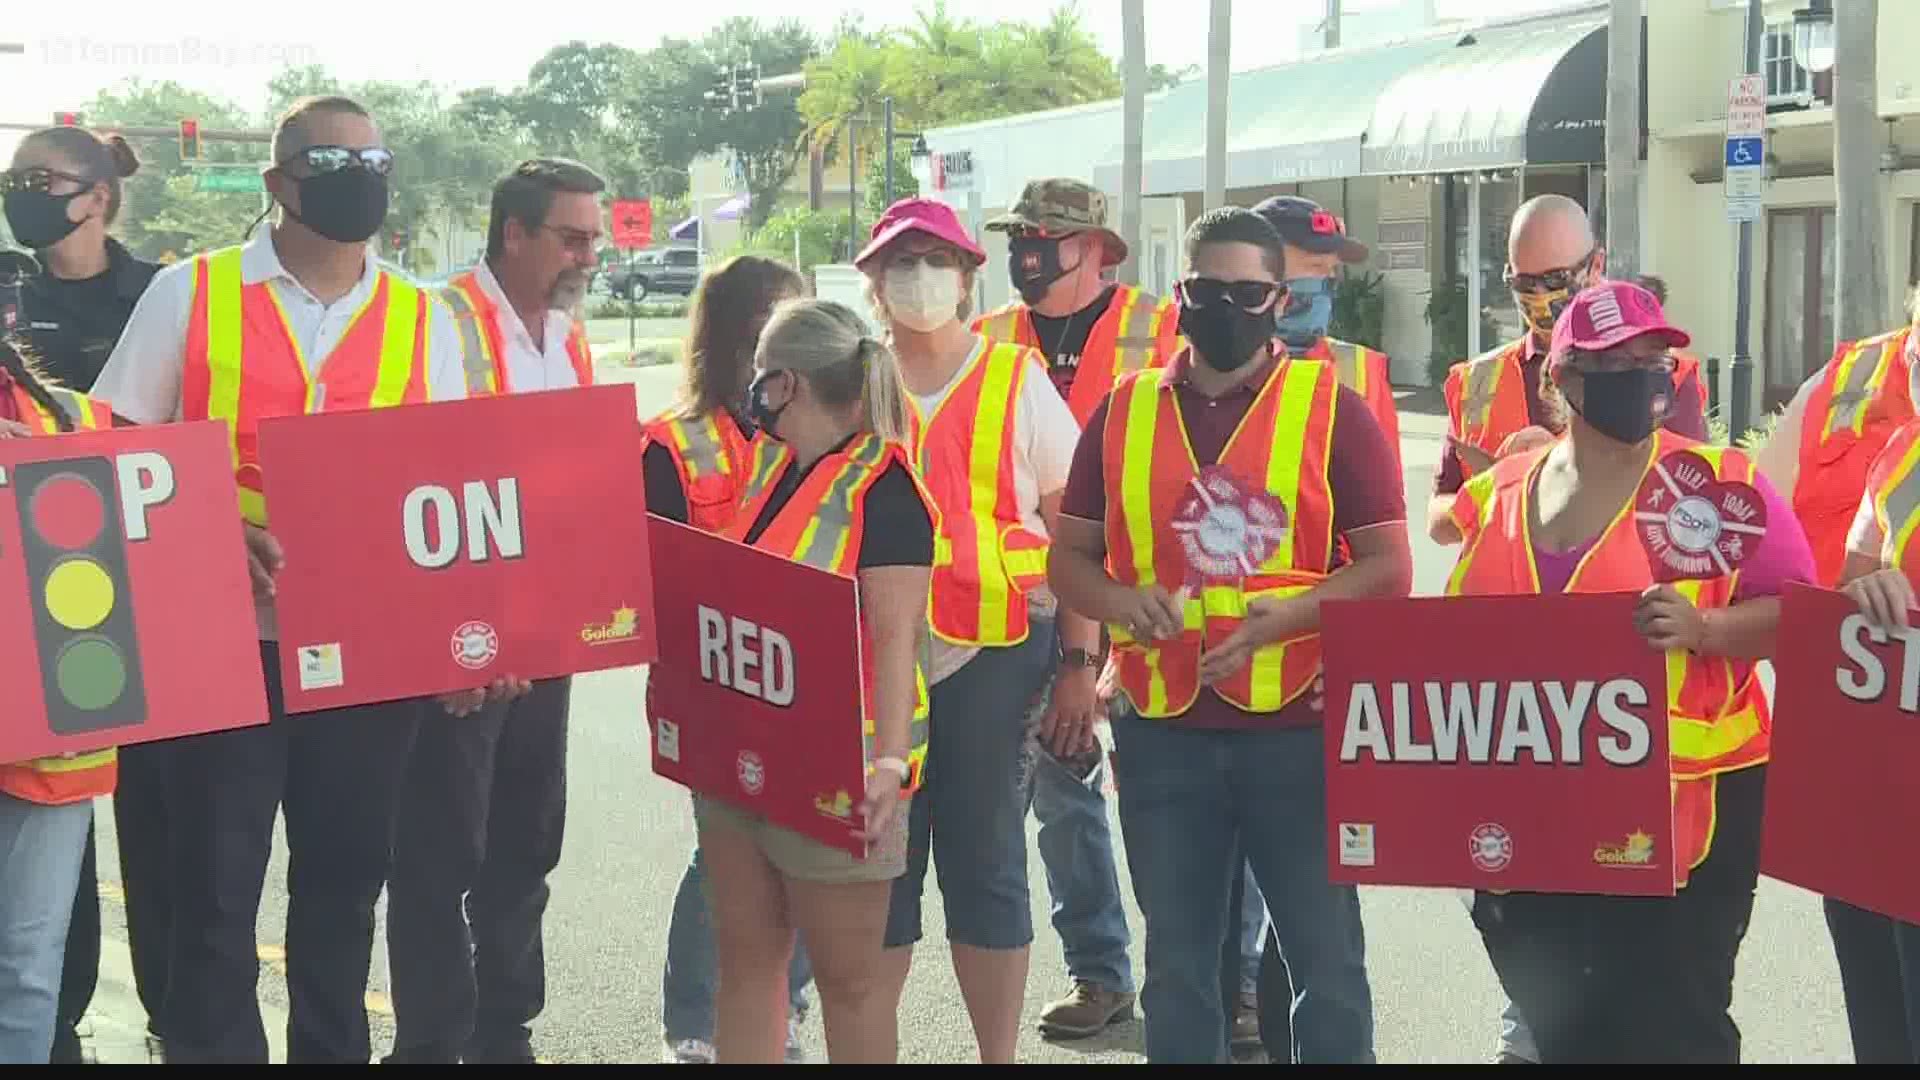 Stop on Red Week A nationwide effort to save lives